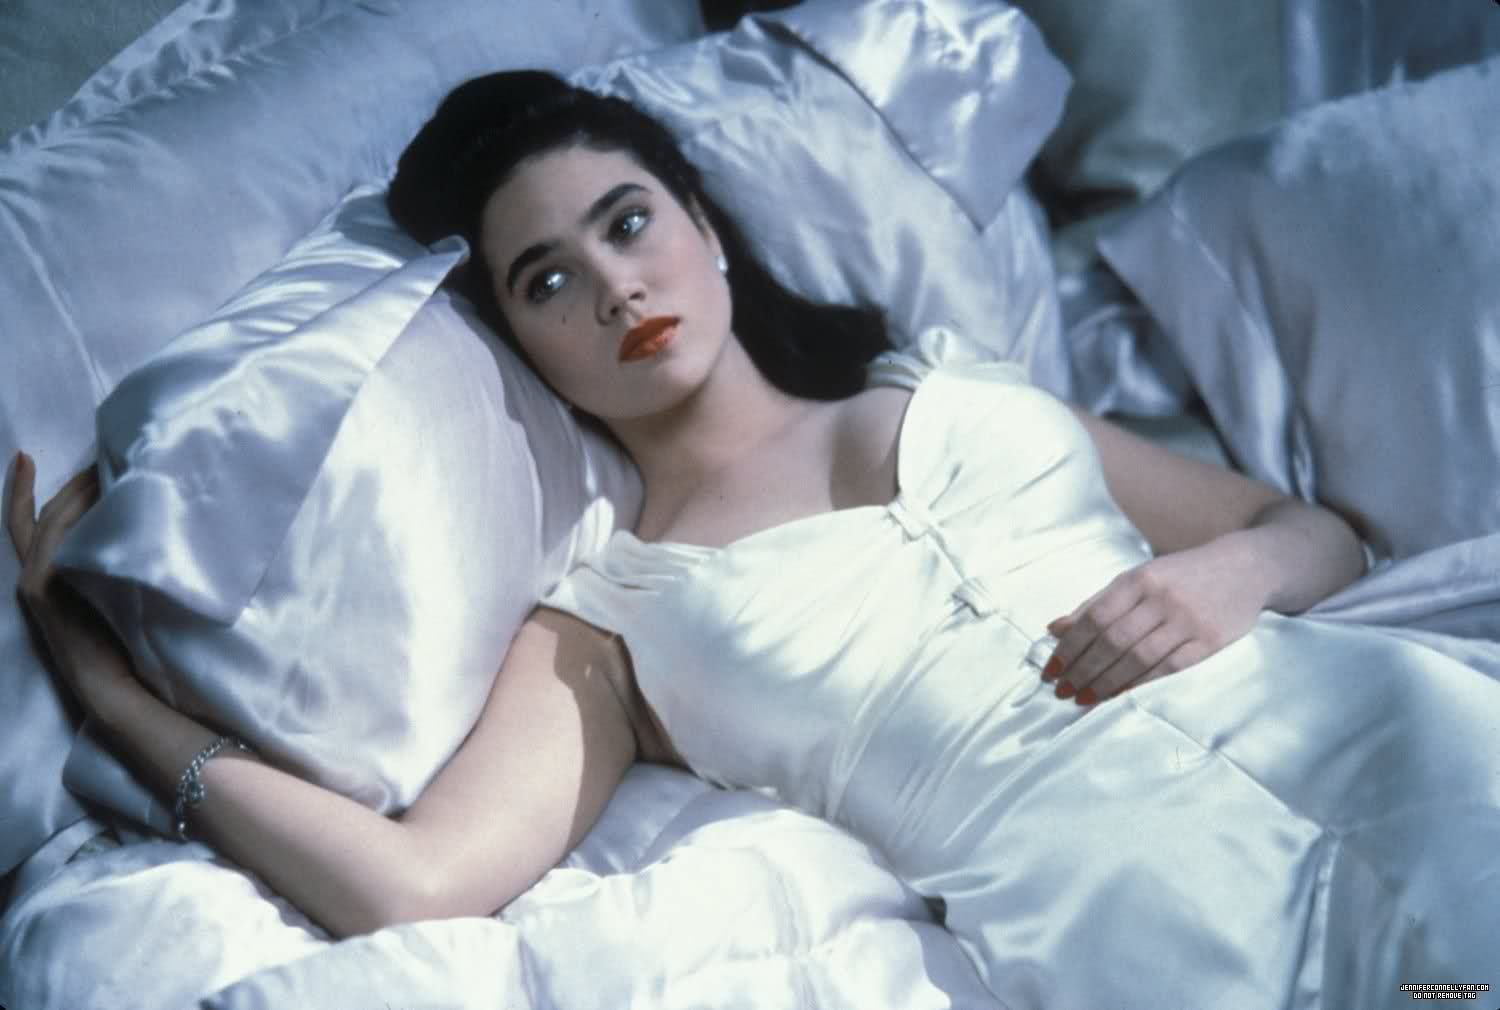 Jennifer Connelly in The Rocketeer